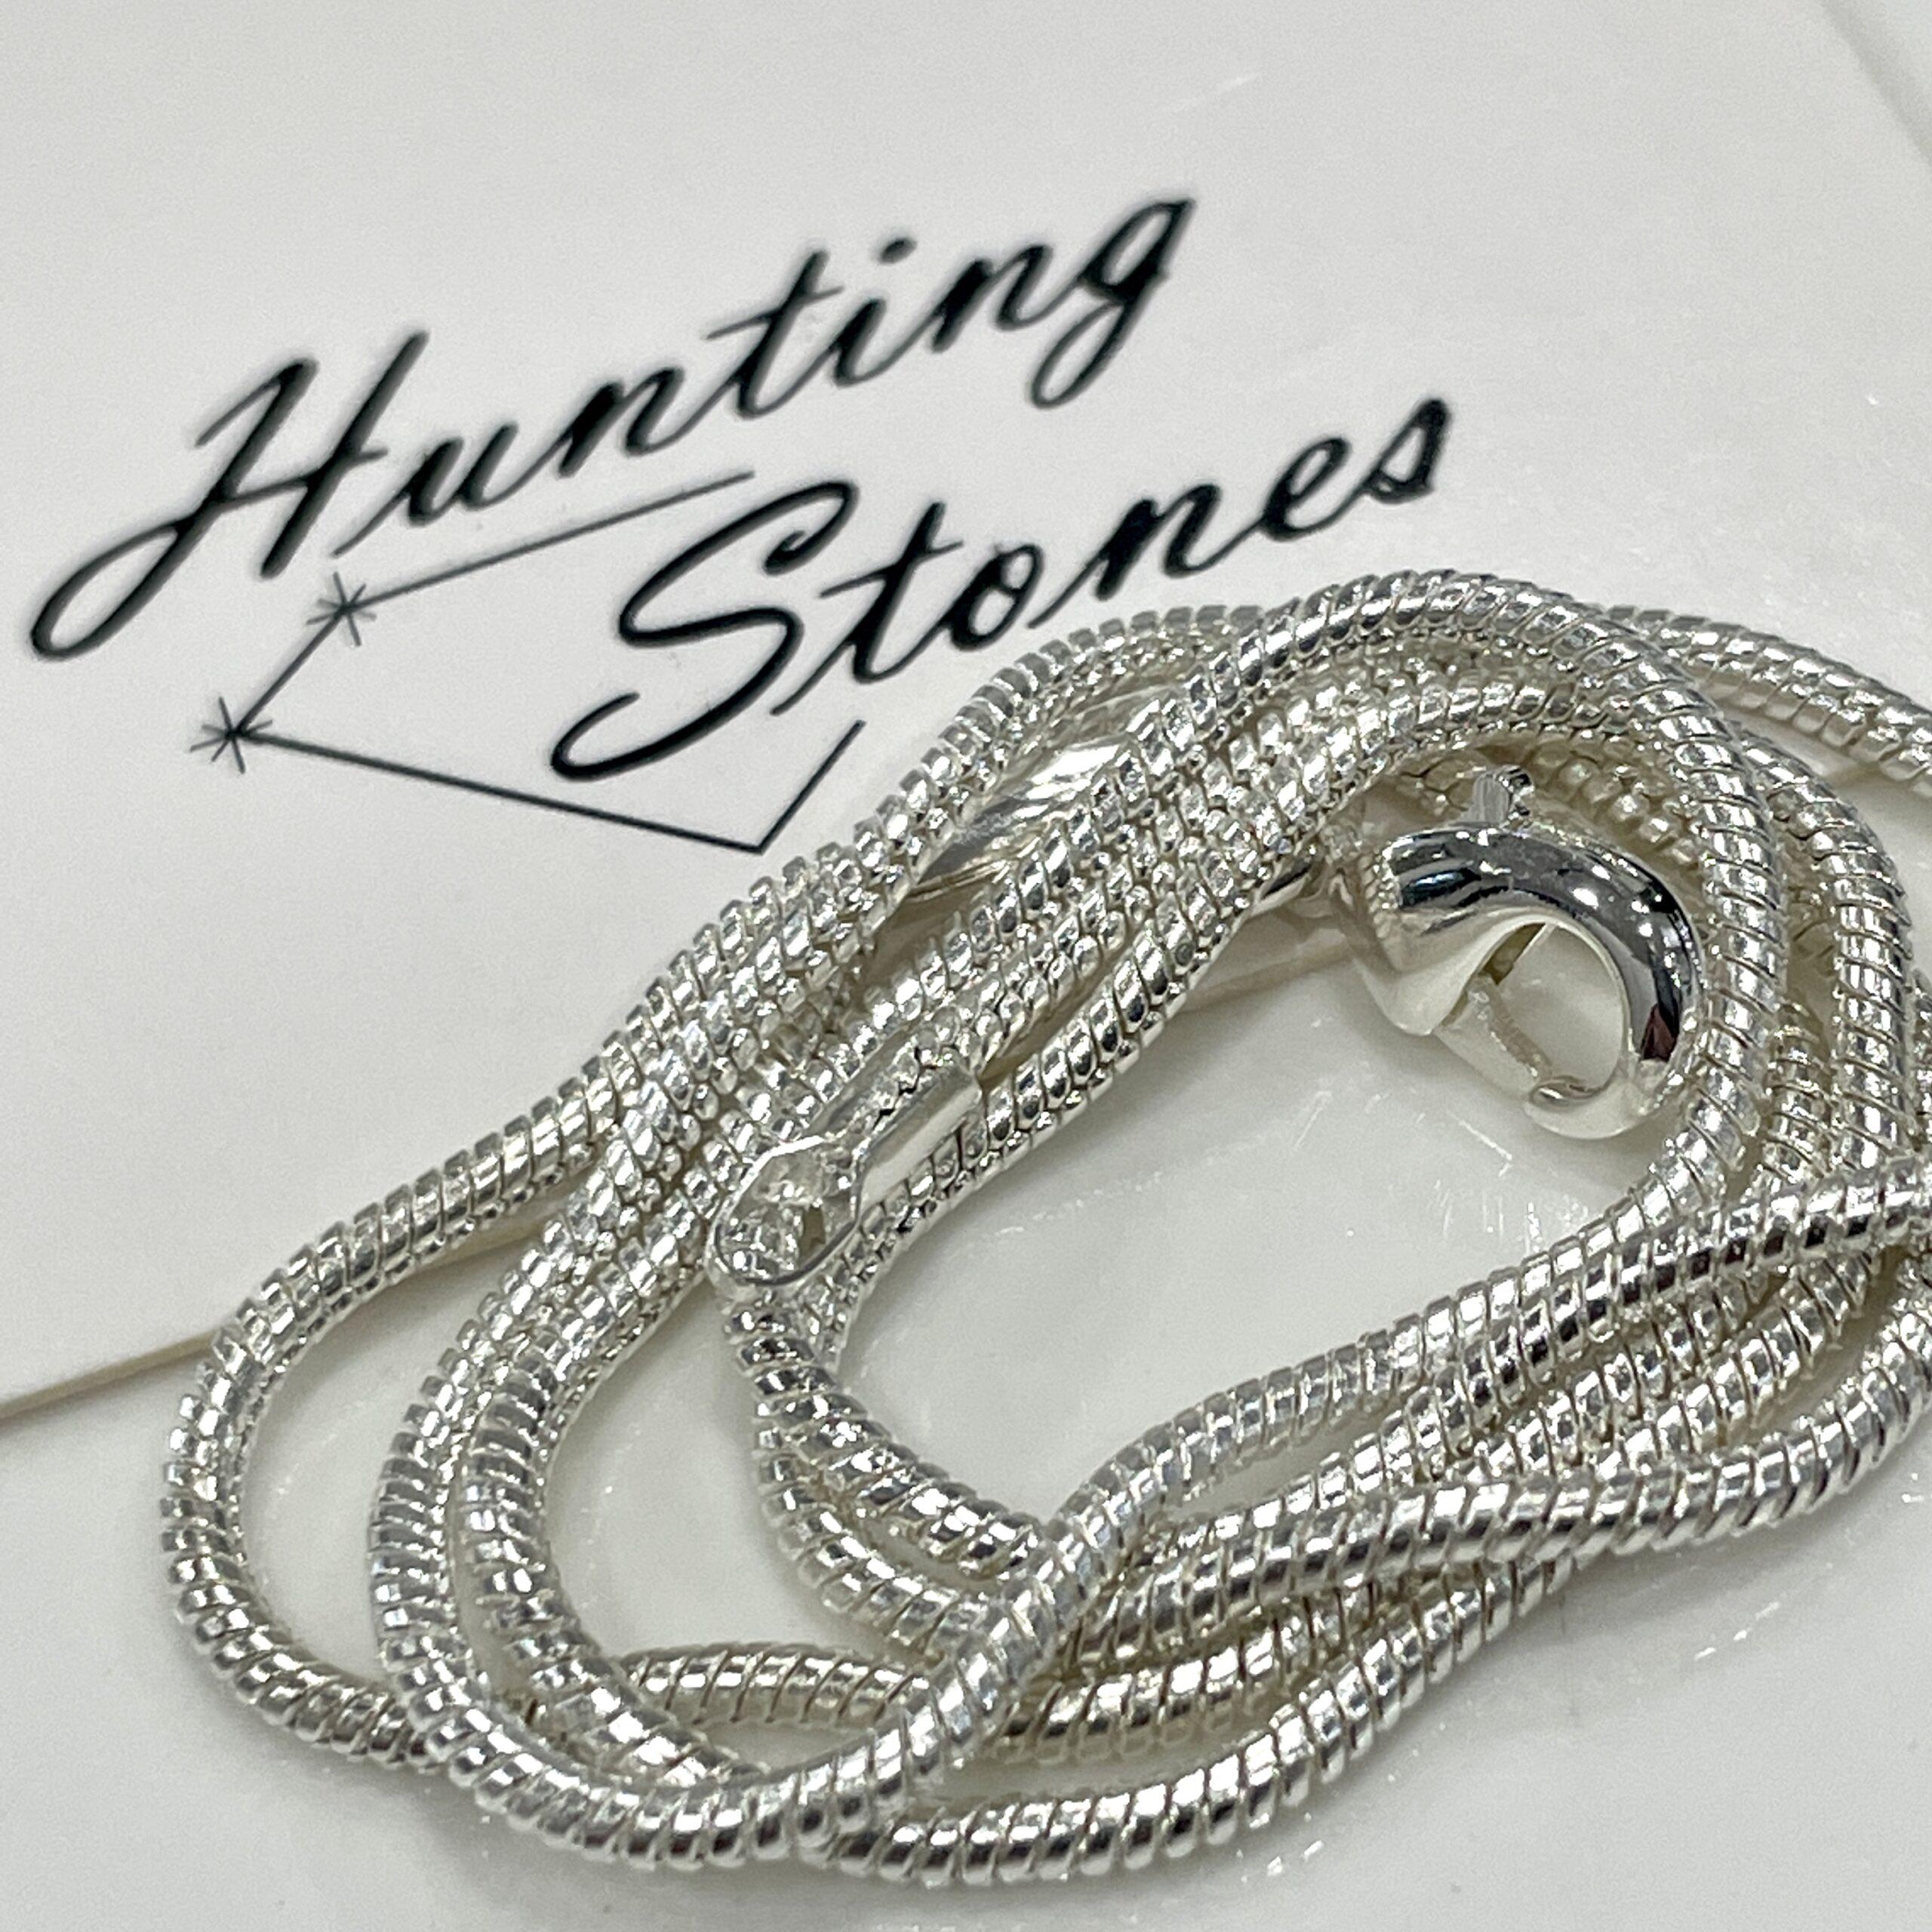 Just in – Quality 925 Sterling Silver plated snake chains from 18 inch up to 24inch. post thumbnail